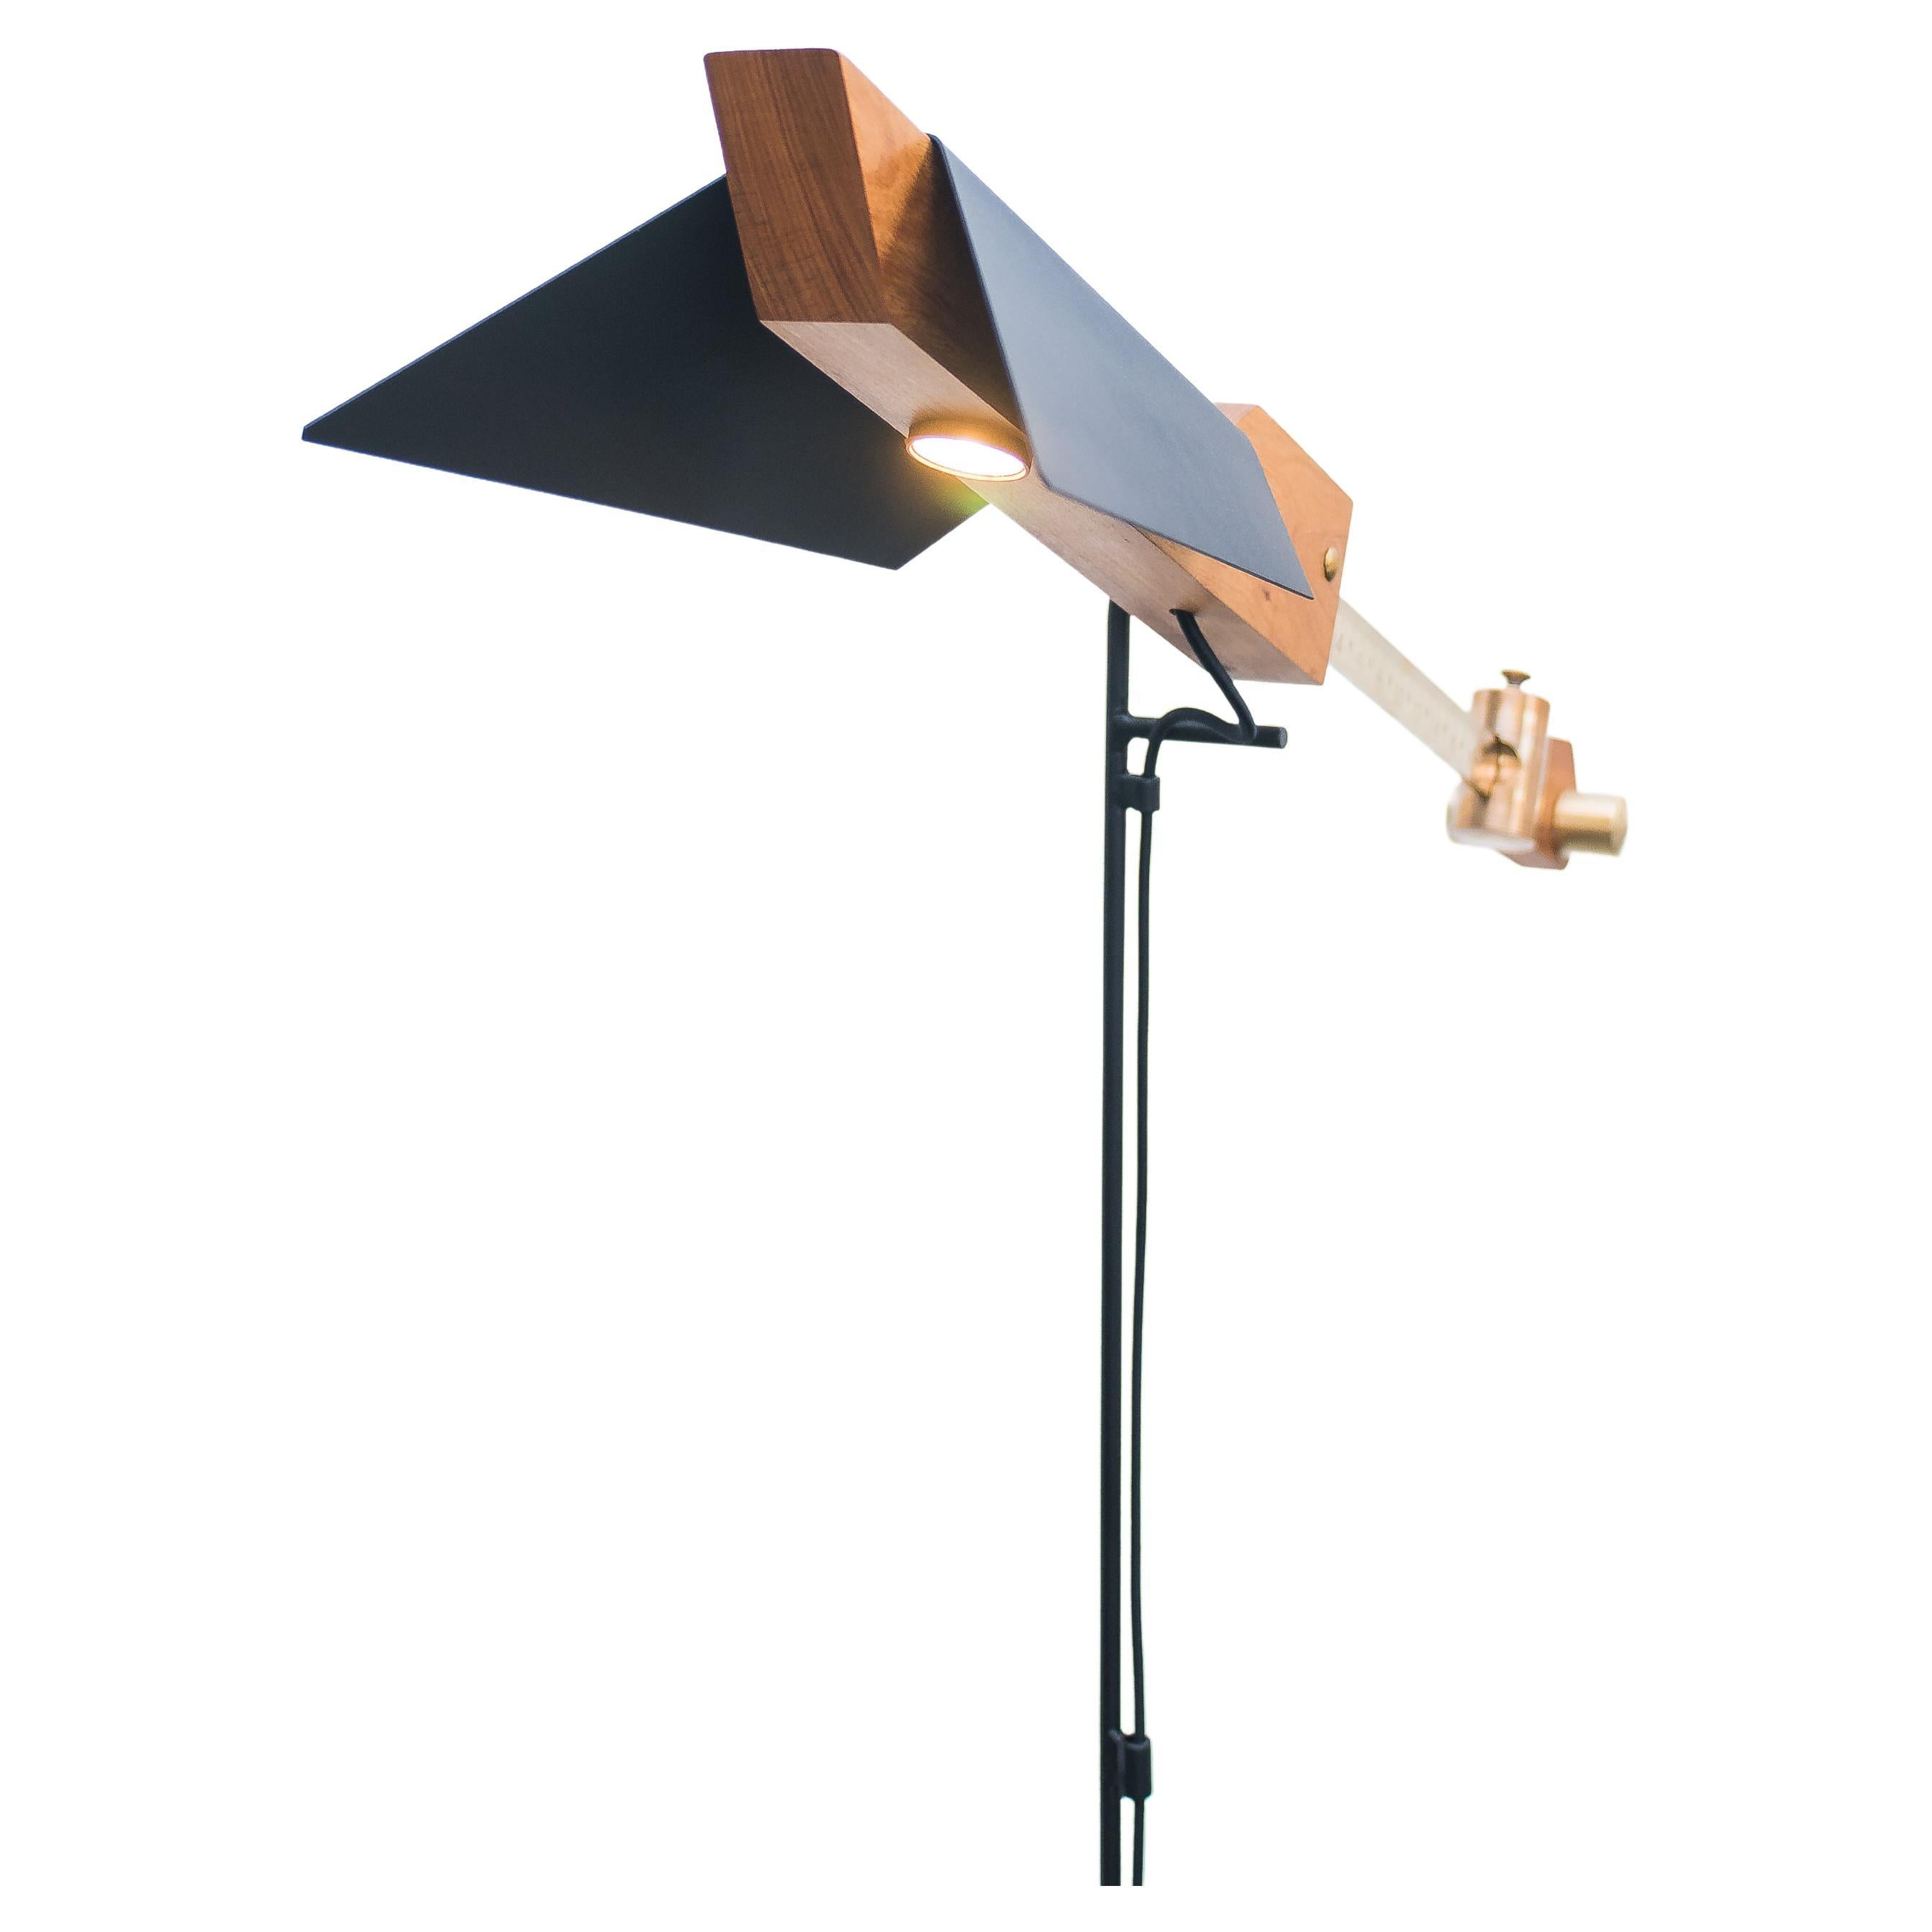 Volare - Contemporary Handmade Industrial Floor Lamp by Caio Superchi For Sale